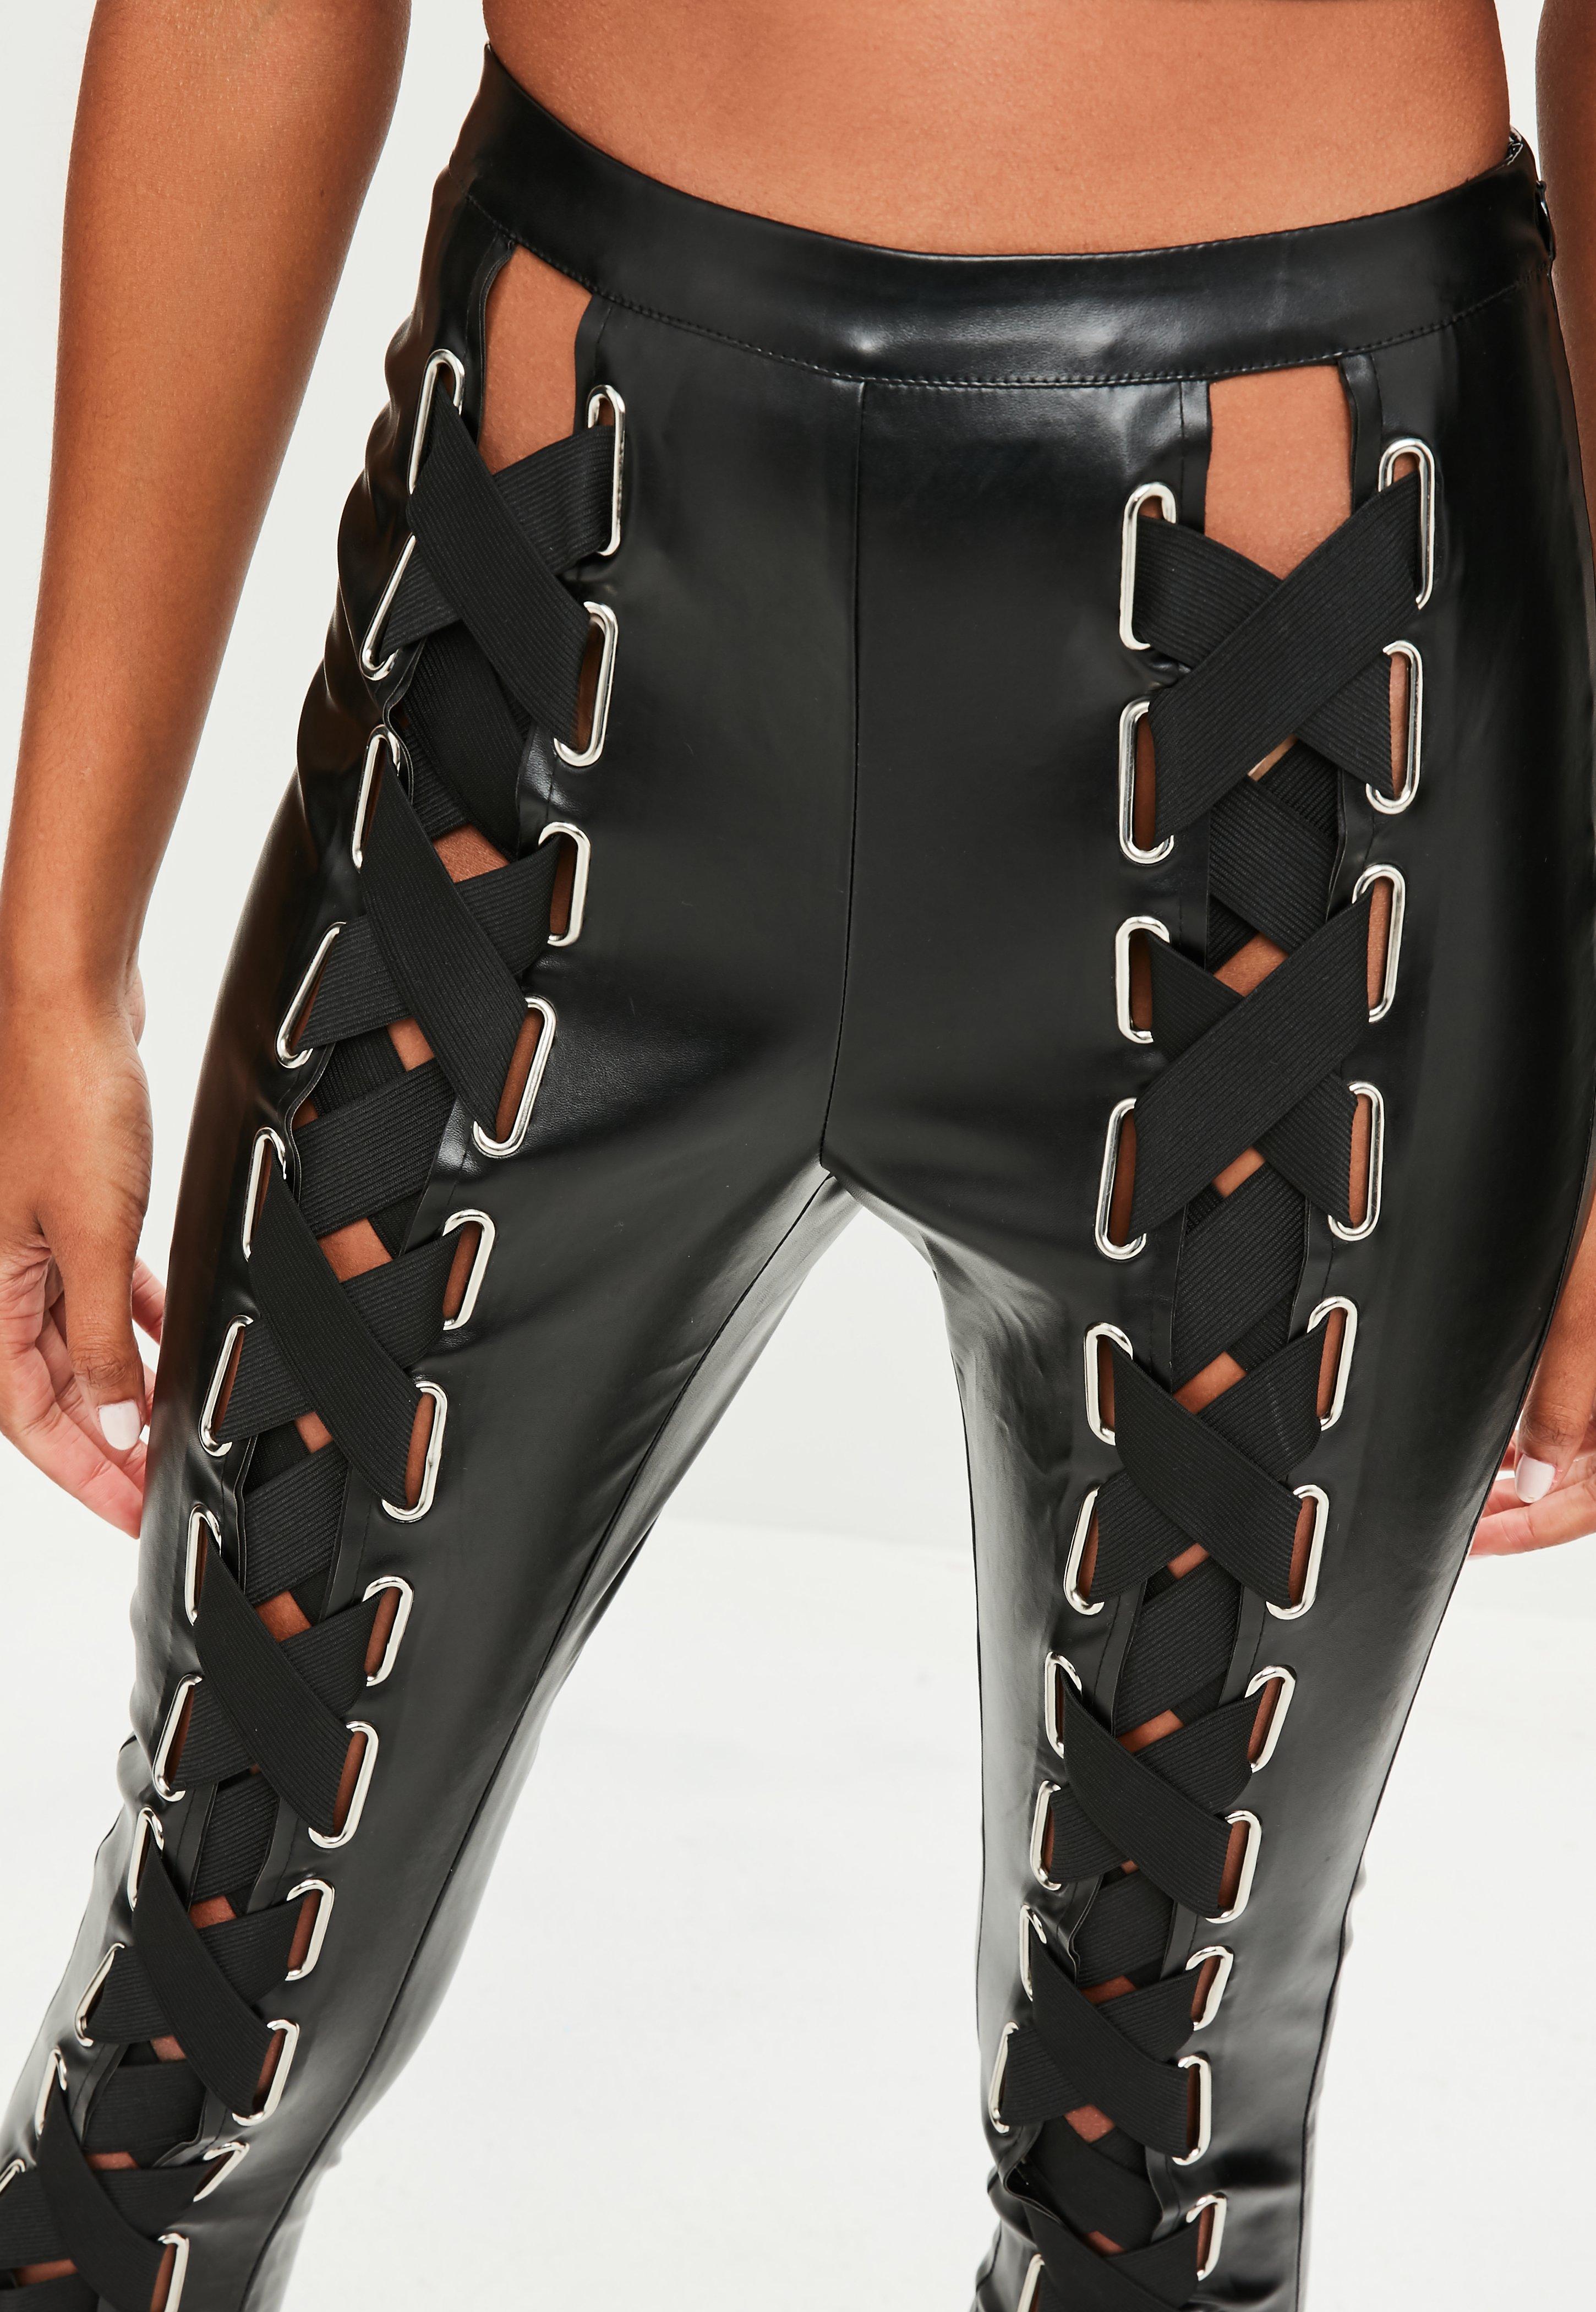 Missguided Black Faux Leather Eyelet Lace Up Pants - Lyst